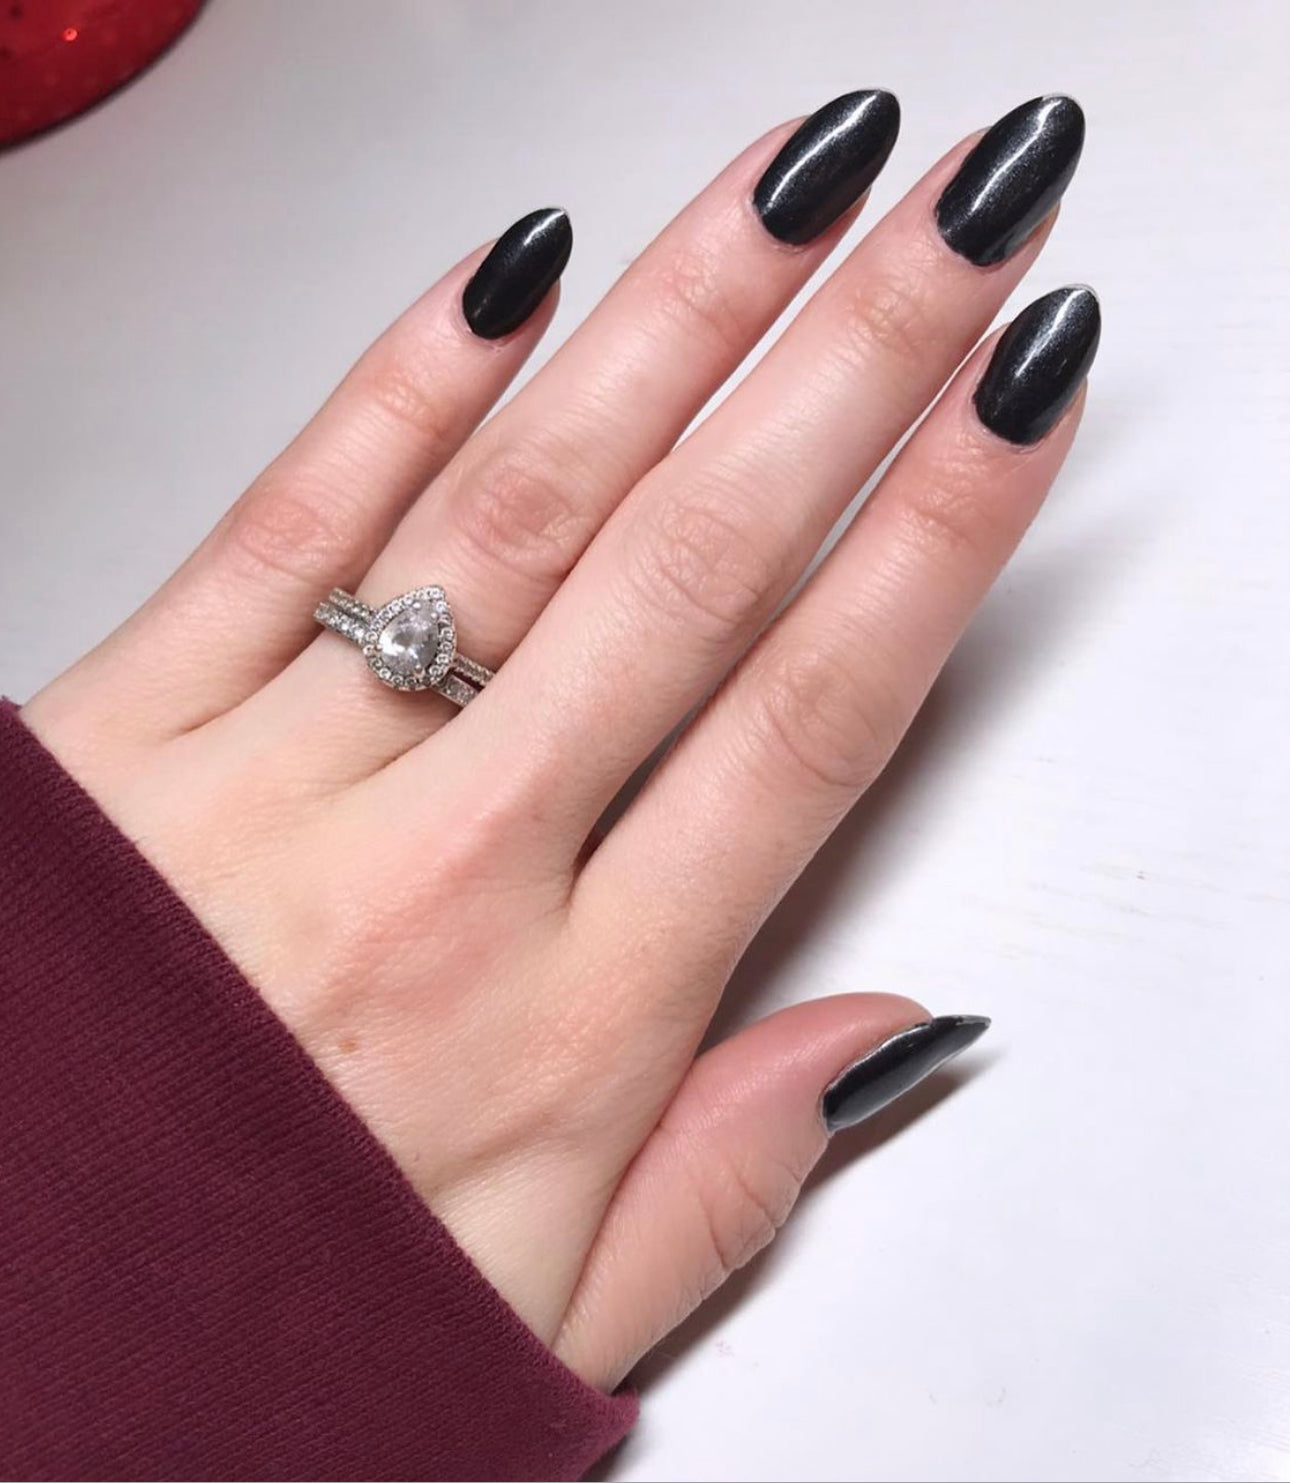 Date Knight - Shimmery Black